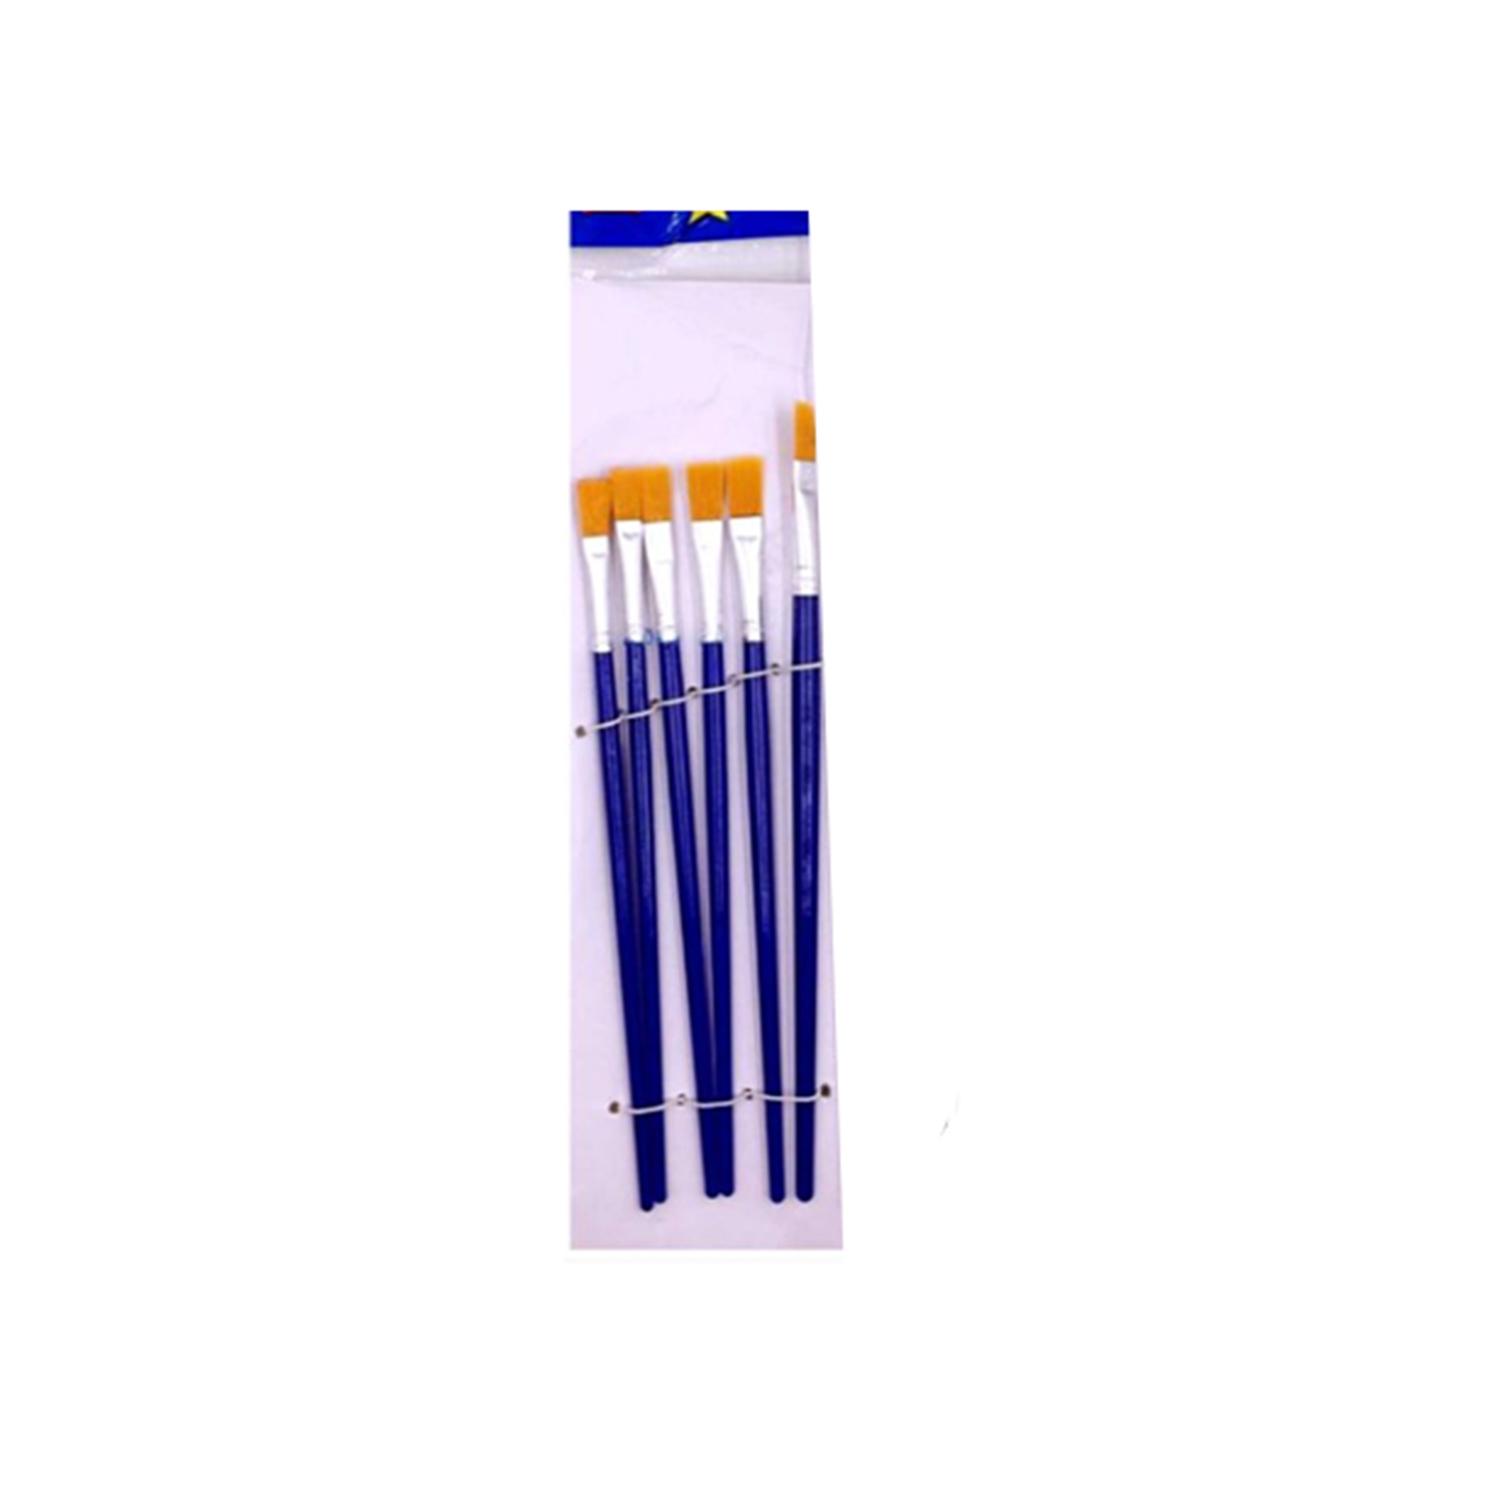 BLUE PAINTING BRUSHES 6 PIECES